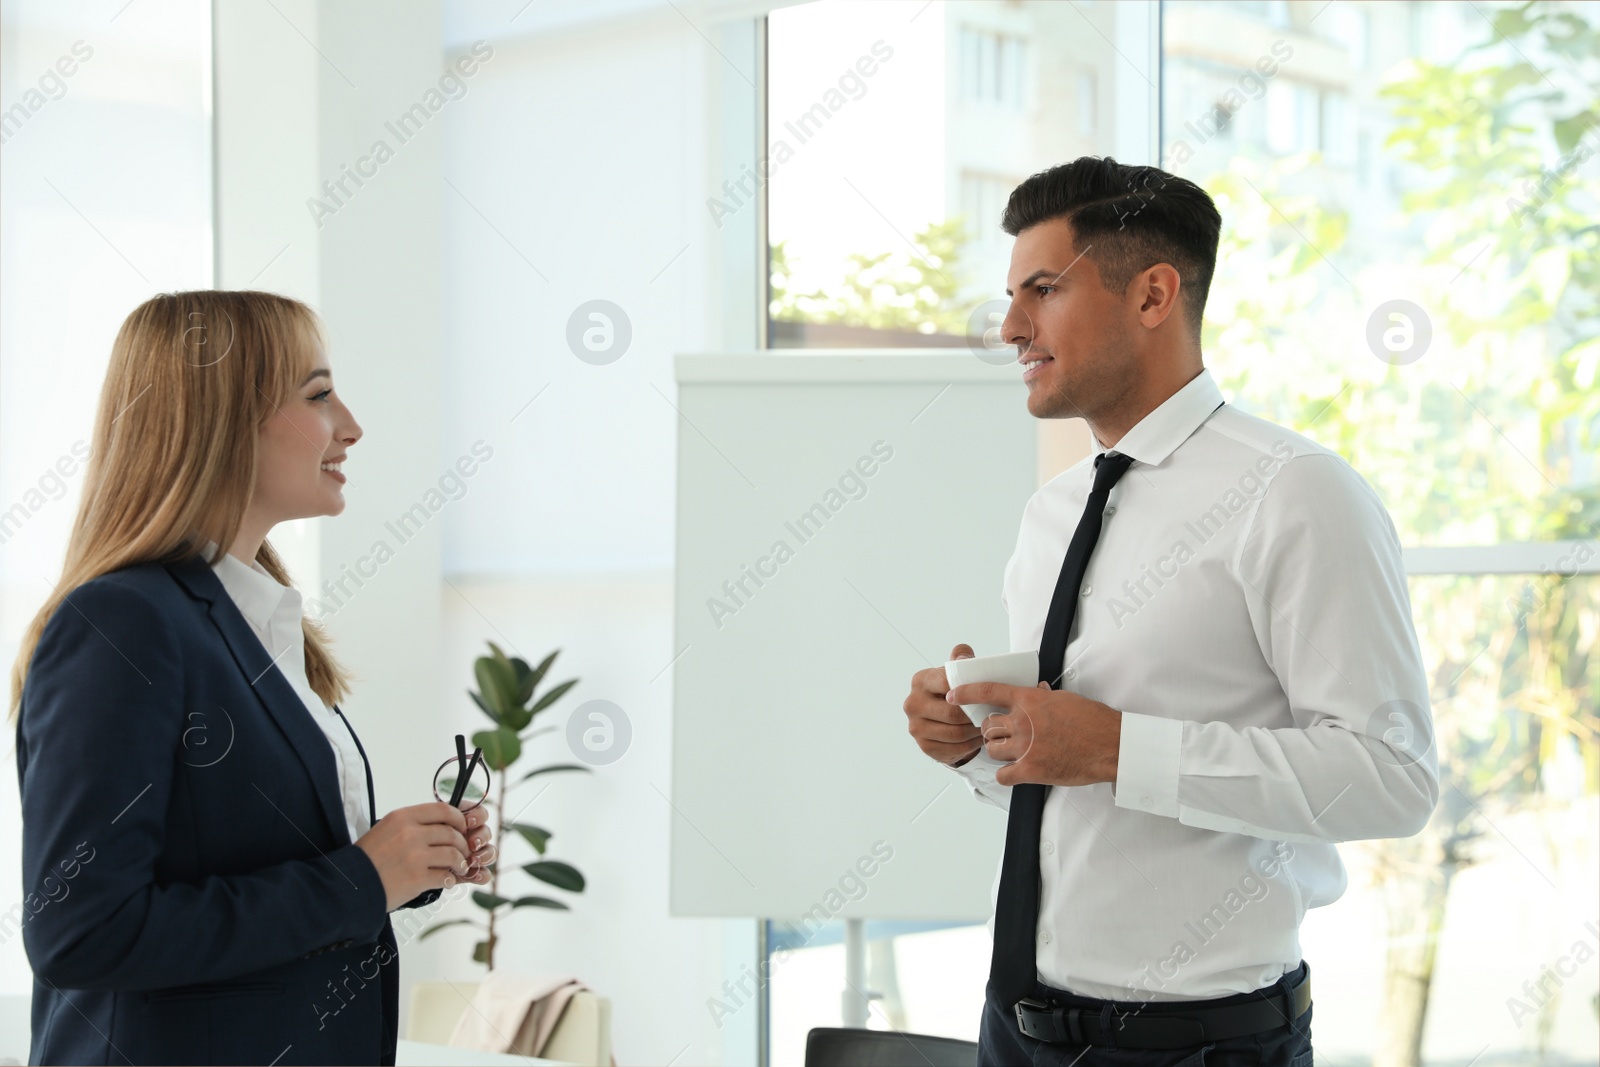 Photo of Office employees talking at workplace during break